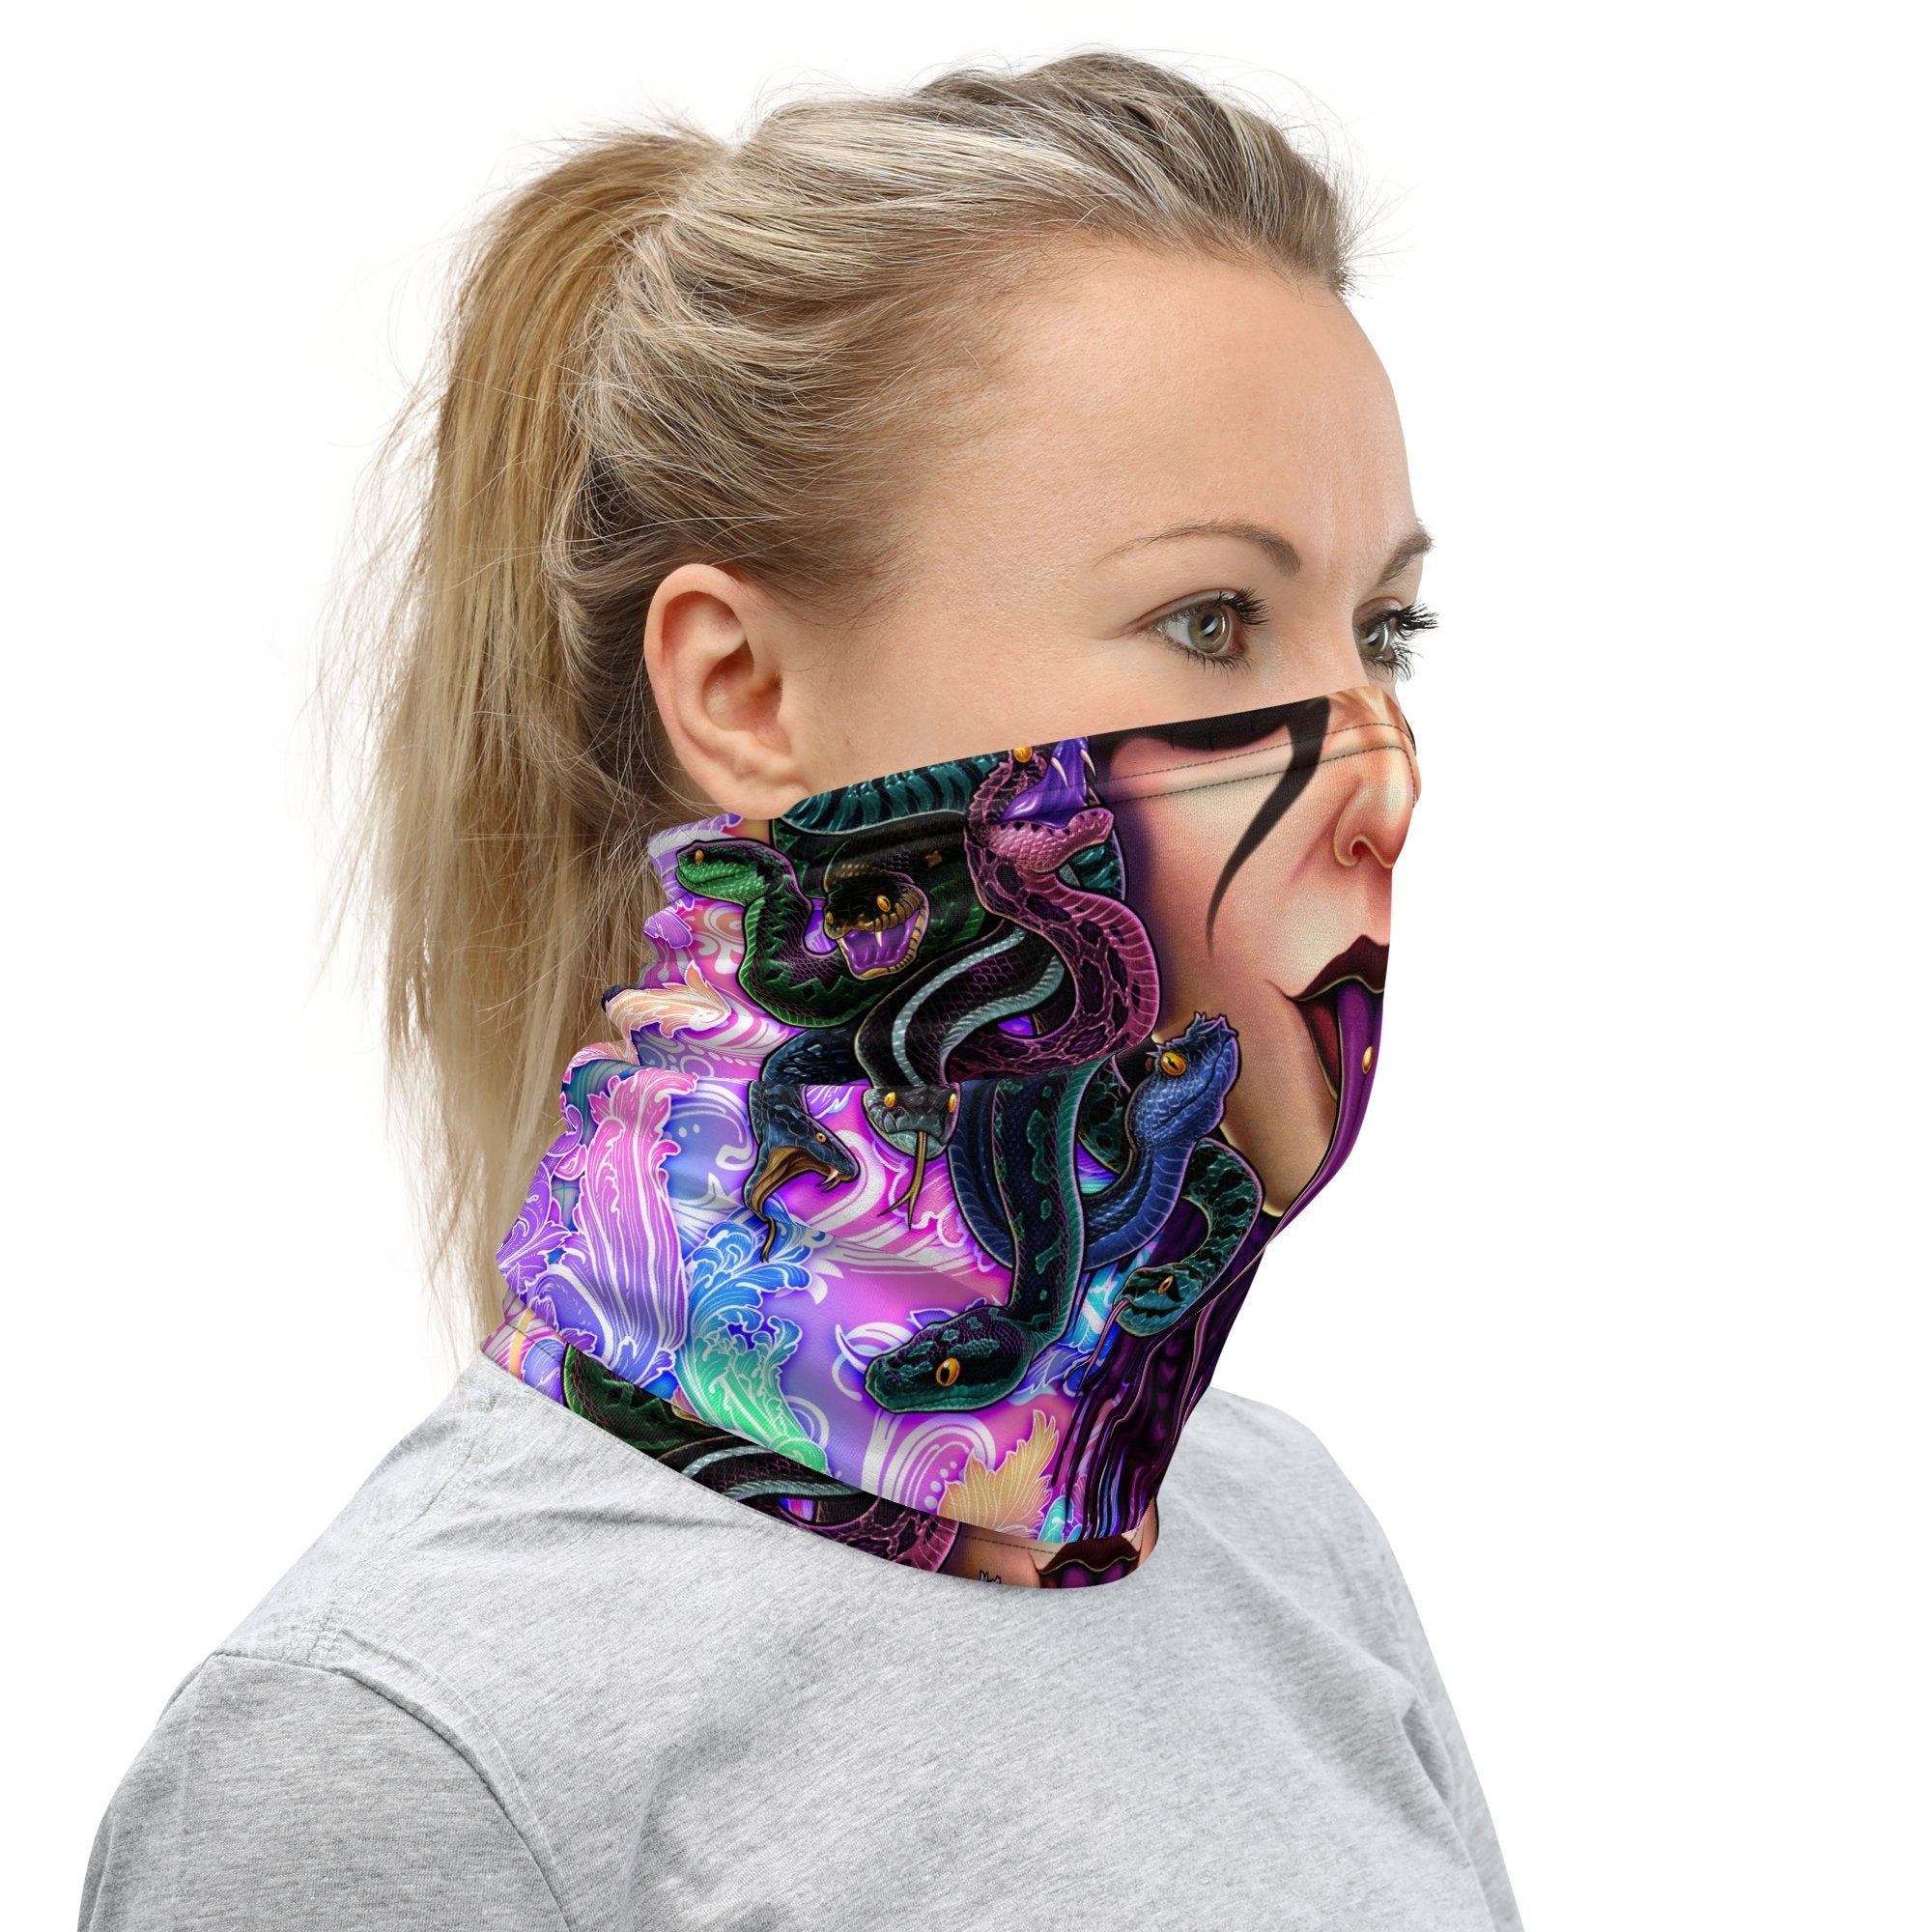 Psychedelic Neck Gaiter, Face Mask, Head Covering, Snakes, Medusa, Rave Outfit, Holographic Pastel Punk Black, Skull Art - 4 Face Options - Abysm Internal